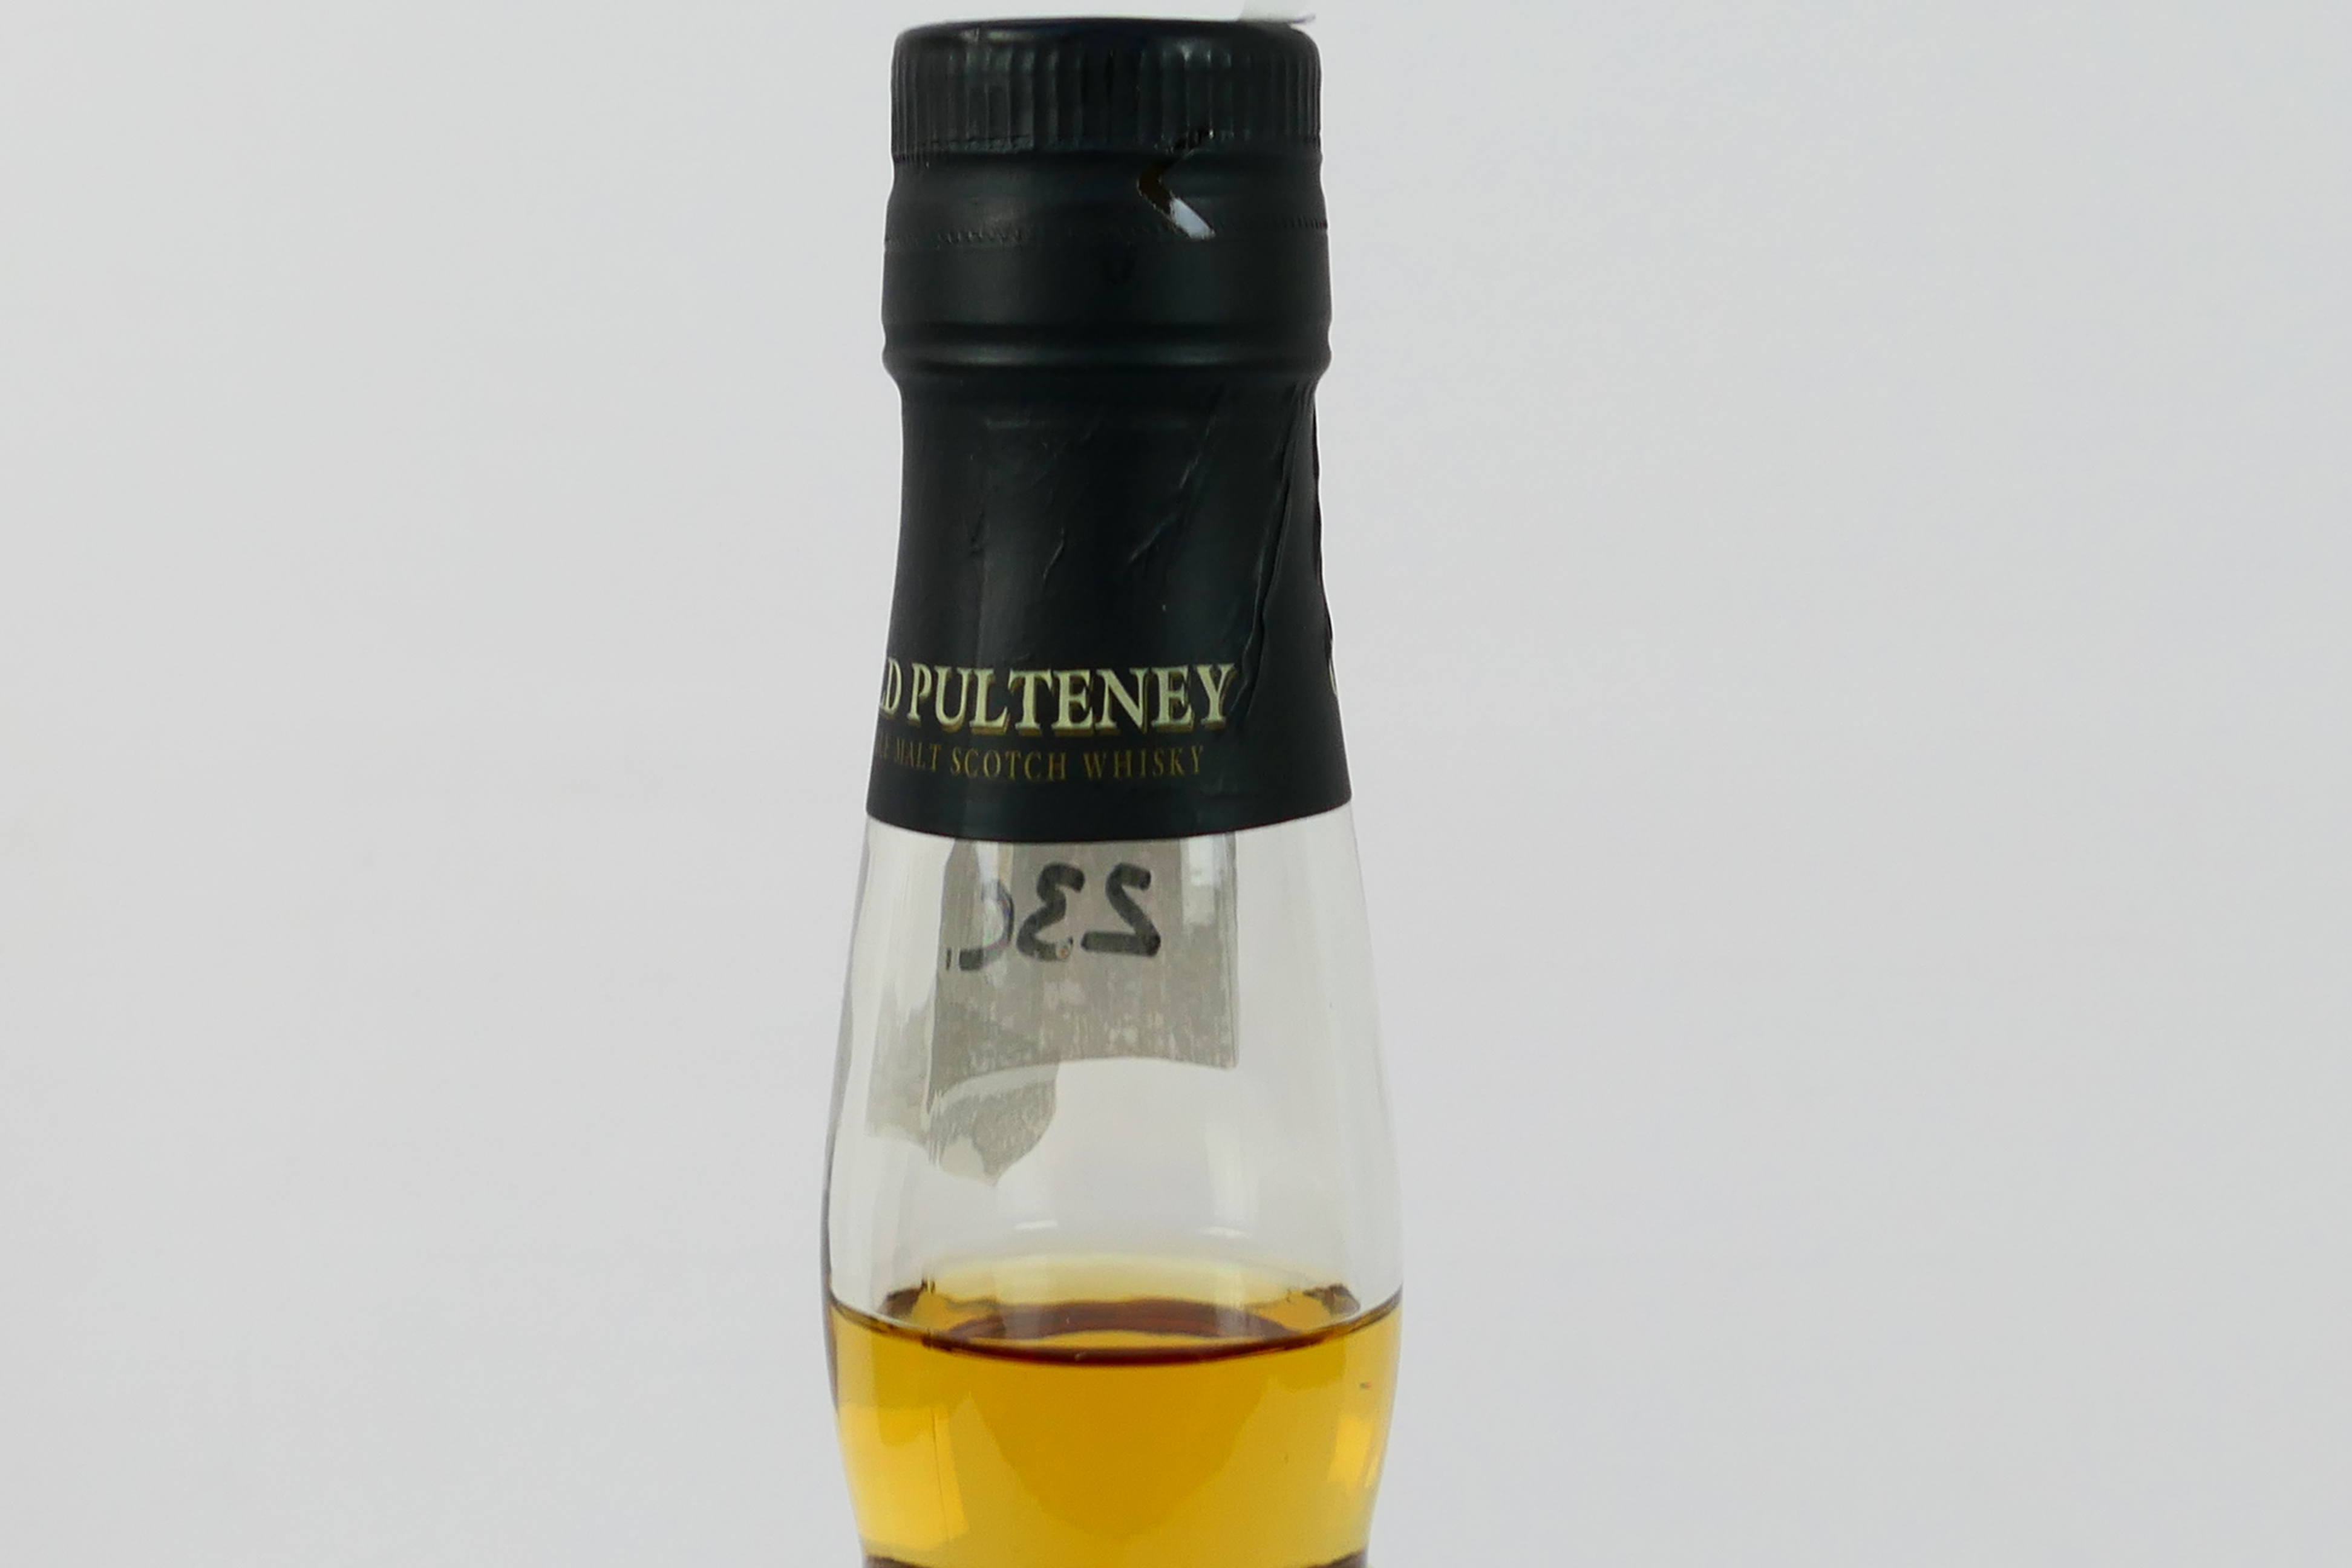 A 70cl bottle of Old Pulteney 12 Year Old single malt whisky, 40% abv. - Image 6 of 6